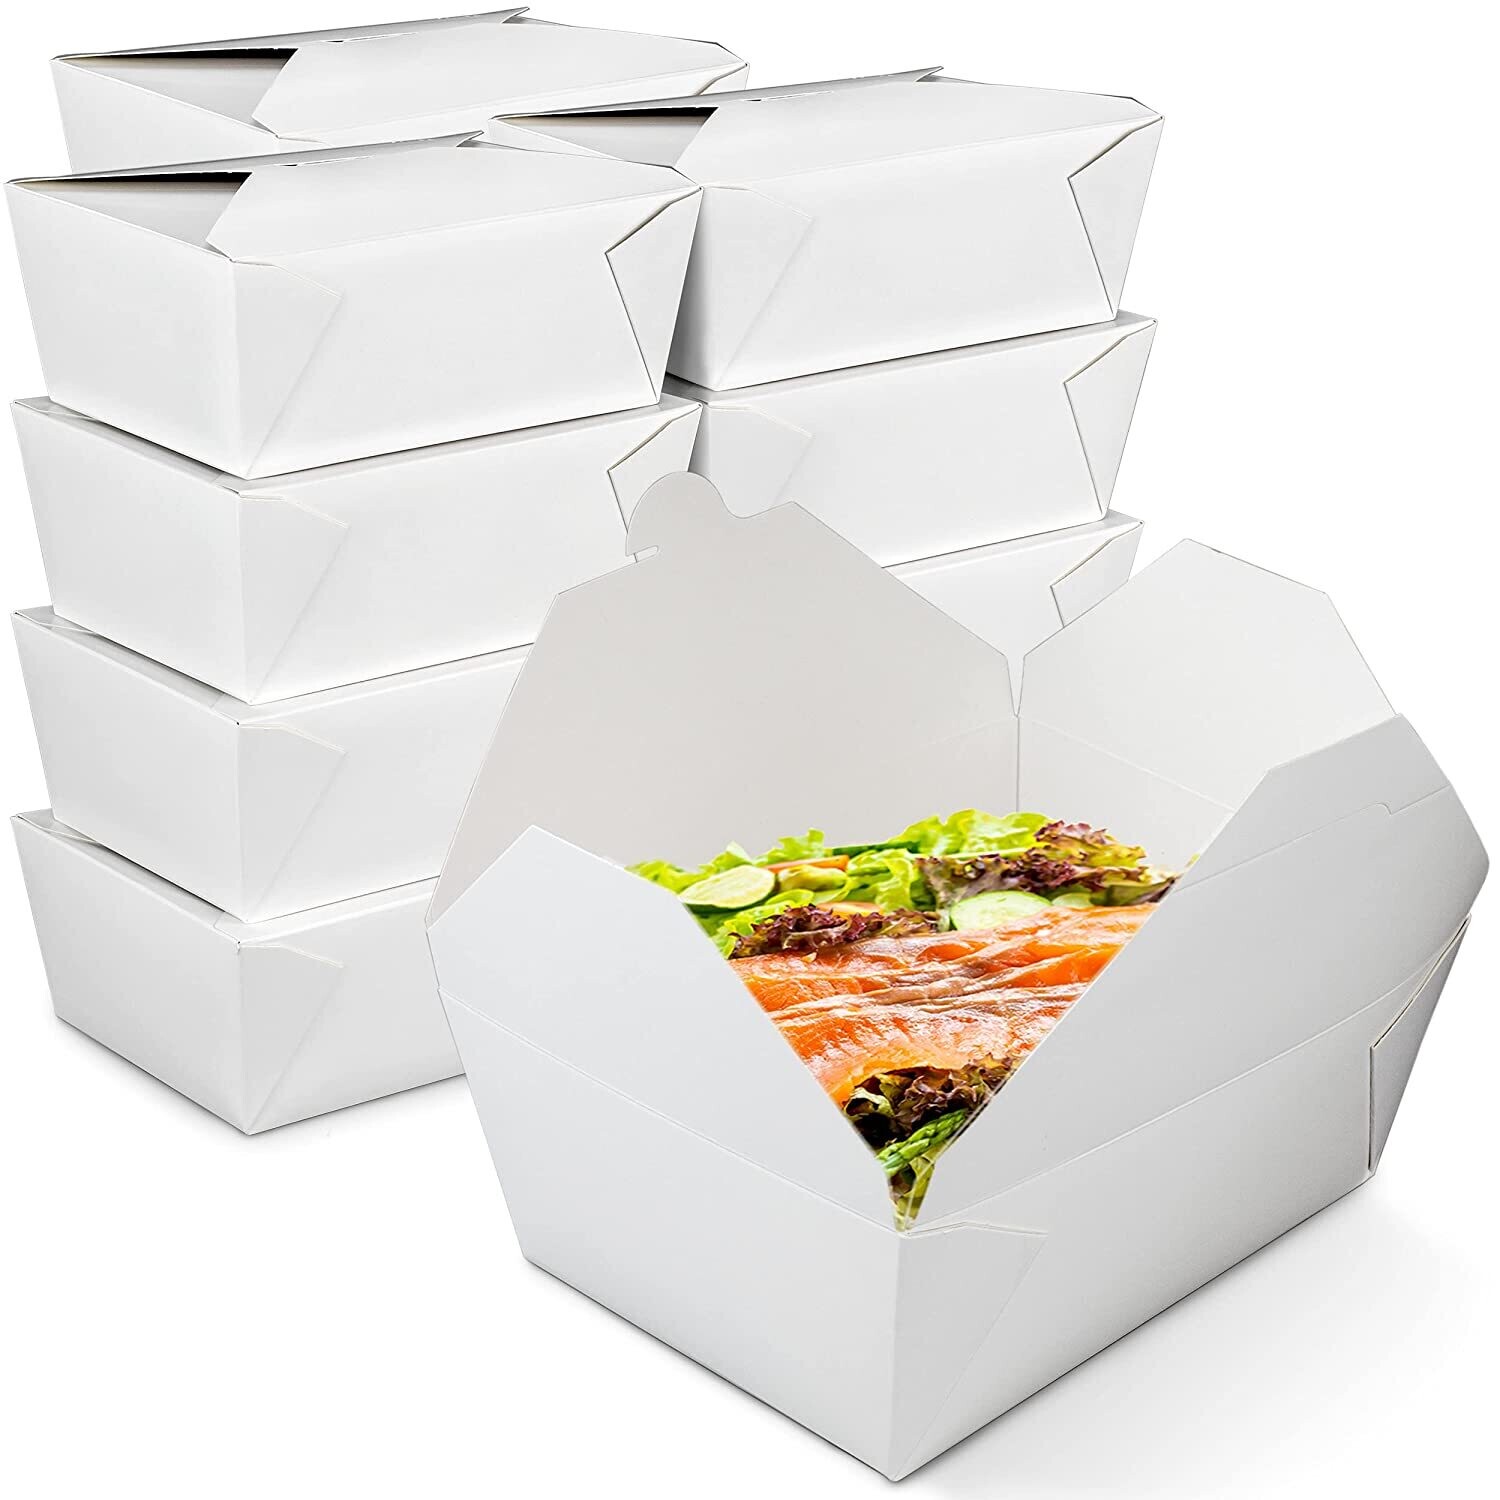 Disposable Take Out Containers 1pc white 175x140x65mm Lunch Meal Food Boxes, Disposable Storage to Go Packaging, Microwave Safe, Leak Grease Resistant for Restaurant and Catering